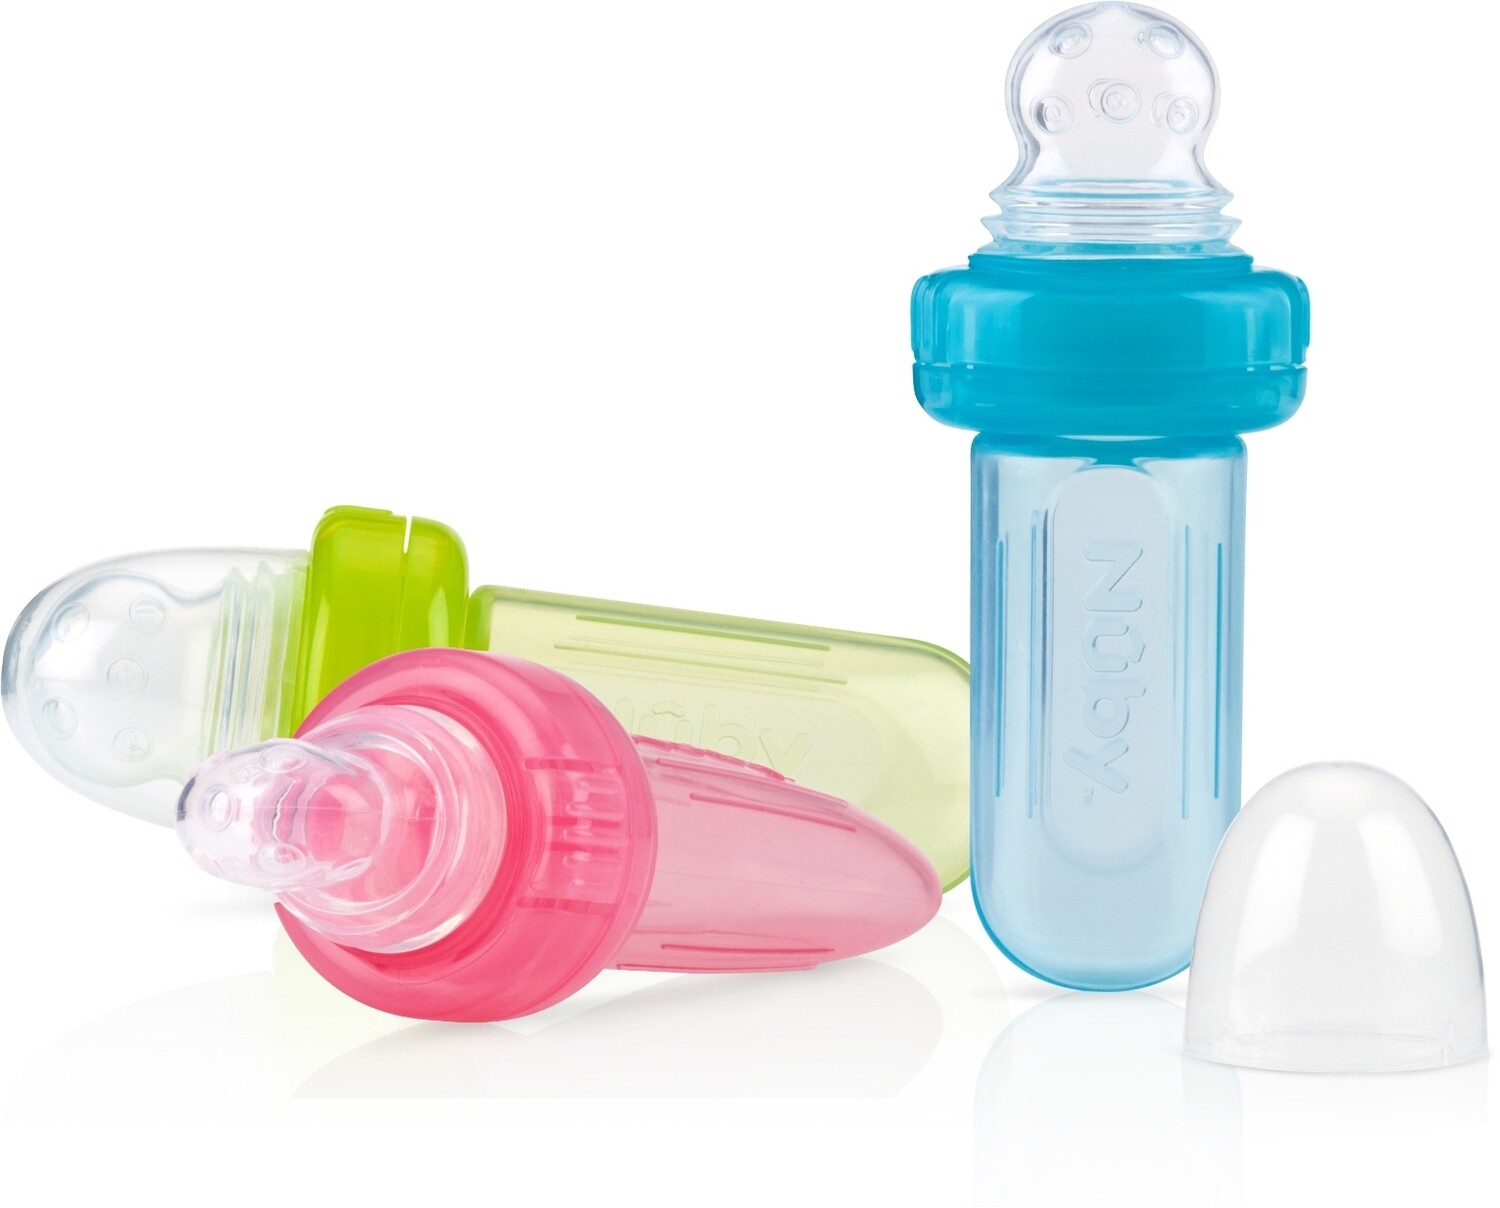 . Case of [12] Nuby? EZ Squee-Z Self Feeding Baby Food Dispensers - Silicone .